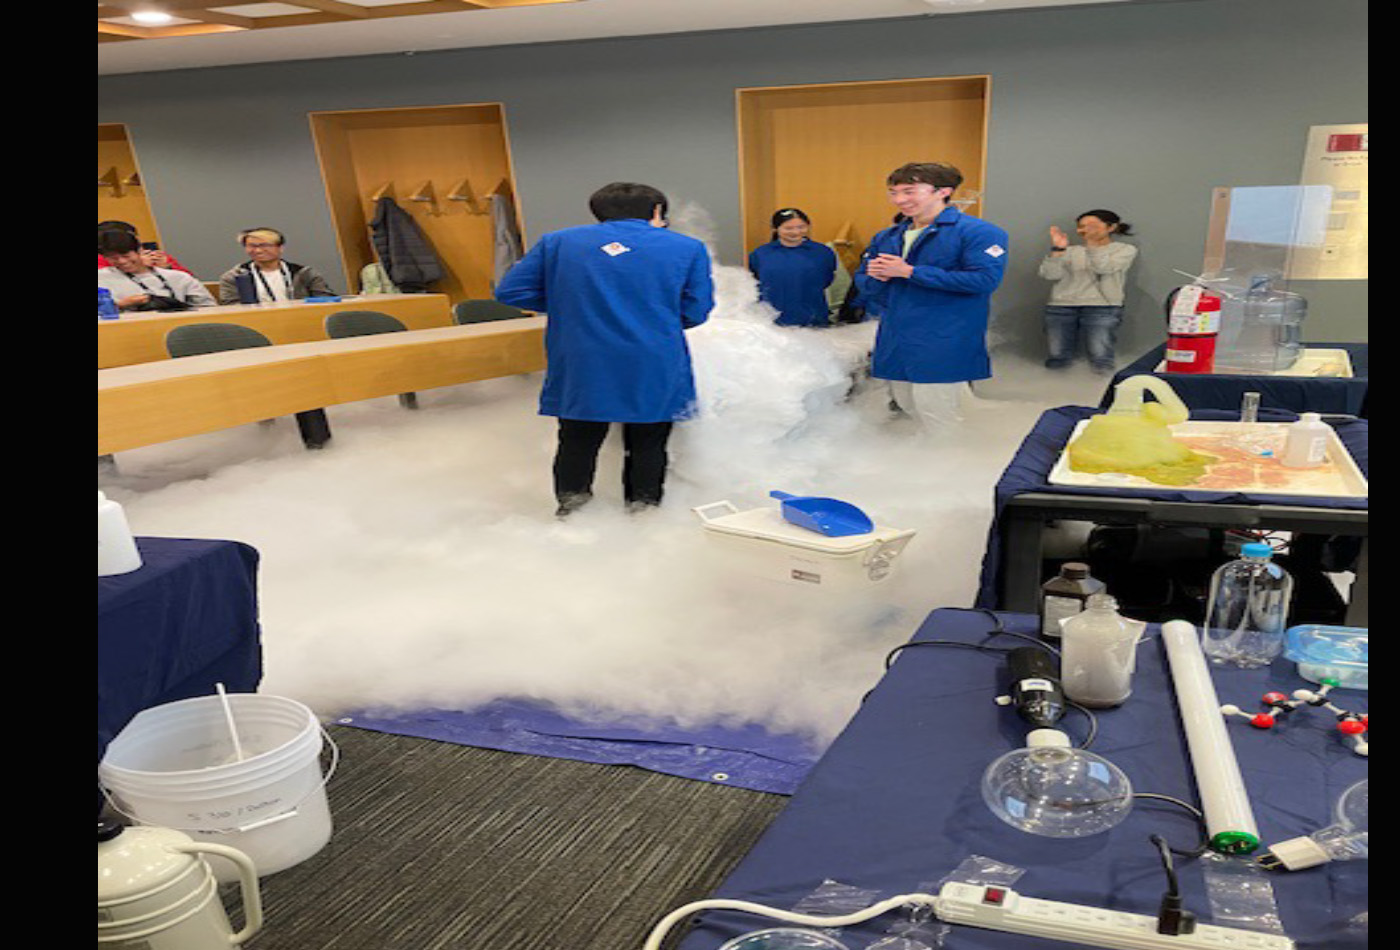 A group of students conduct magical experiments in a classroom.